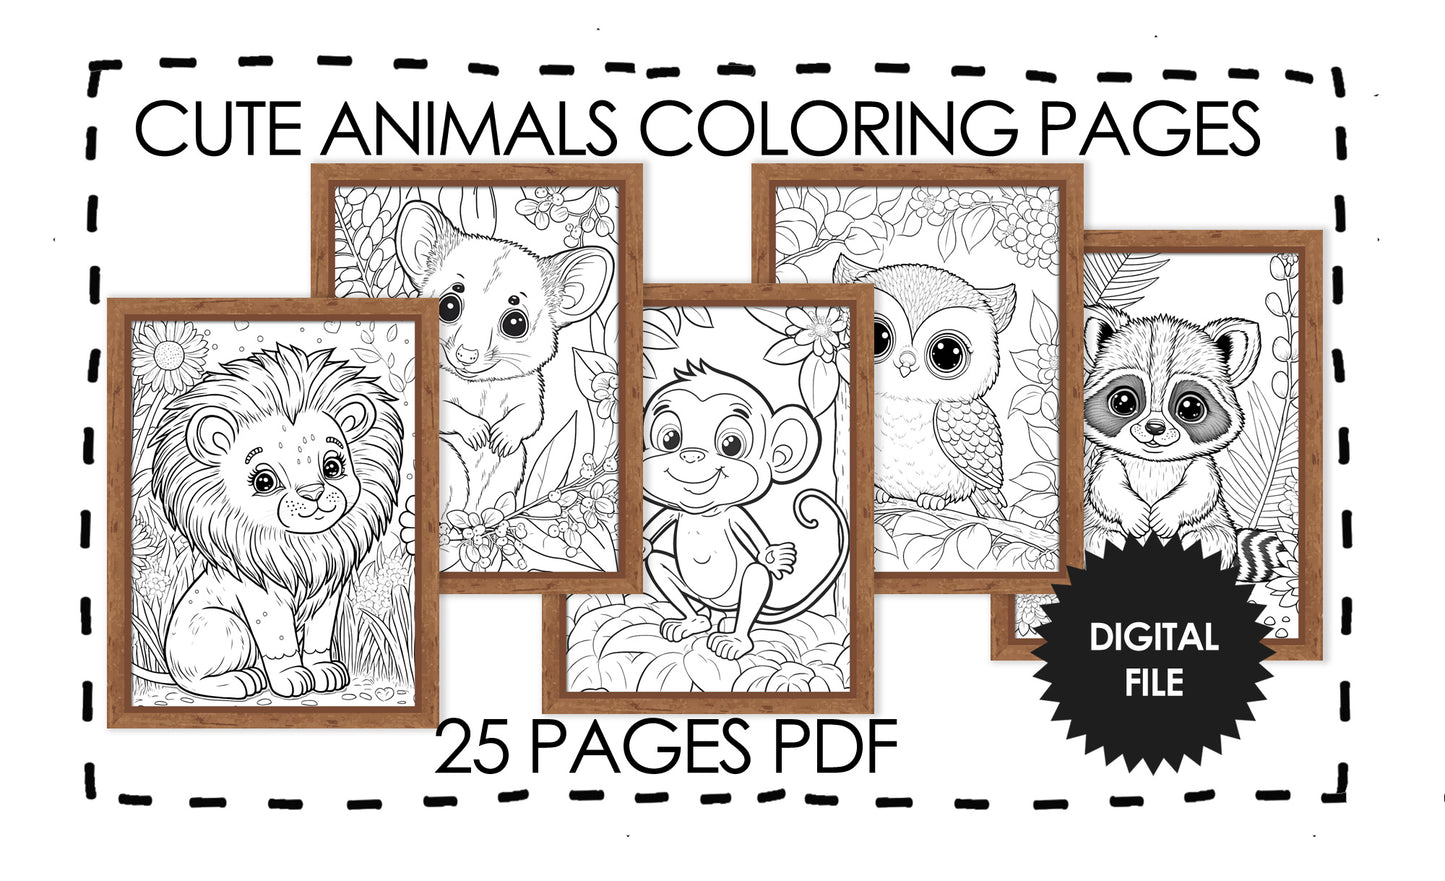 Animal Coloring Book for Kids: Cute Animal Coloring Pages for Kids